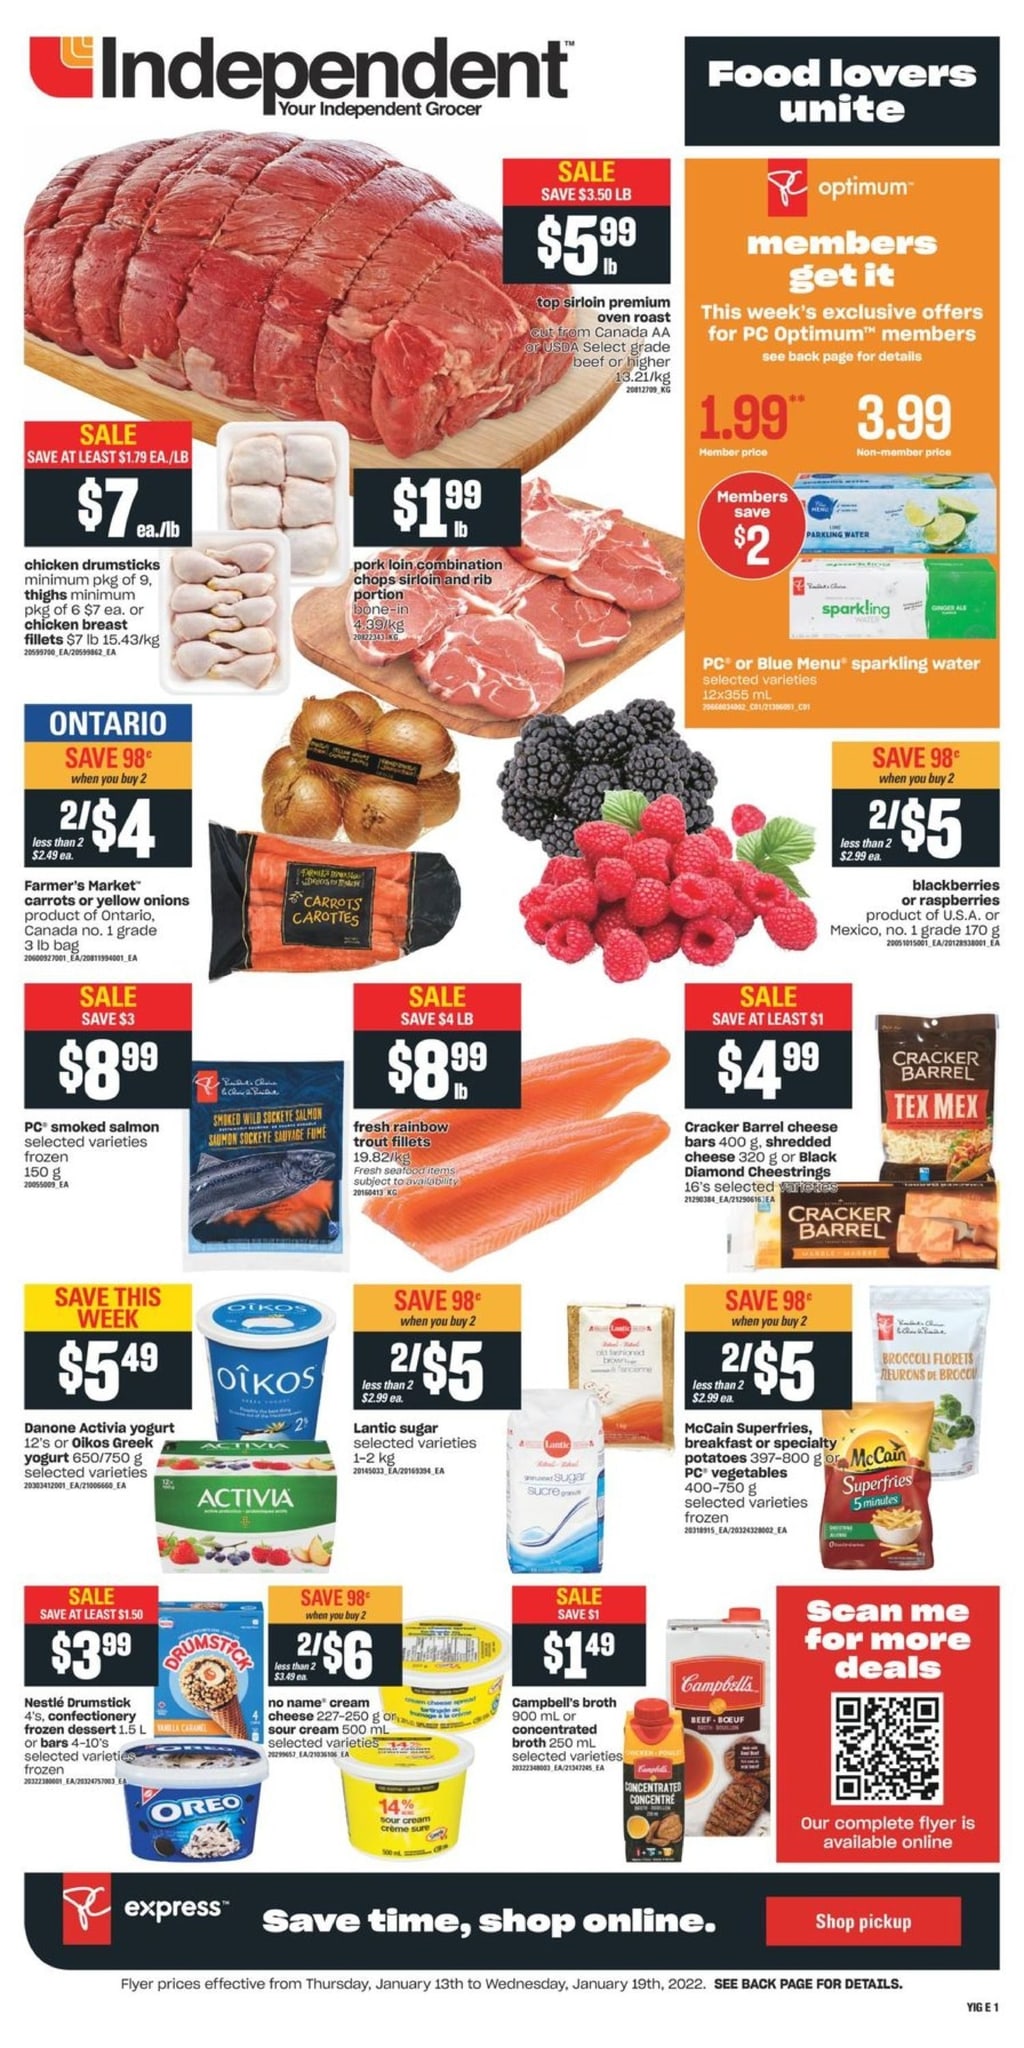 Independent Ontario - Weekly Flyer Specials - Page 1